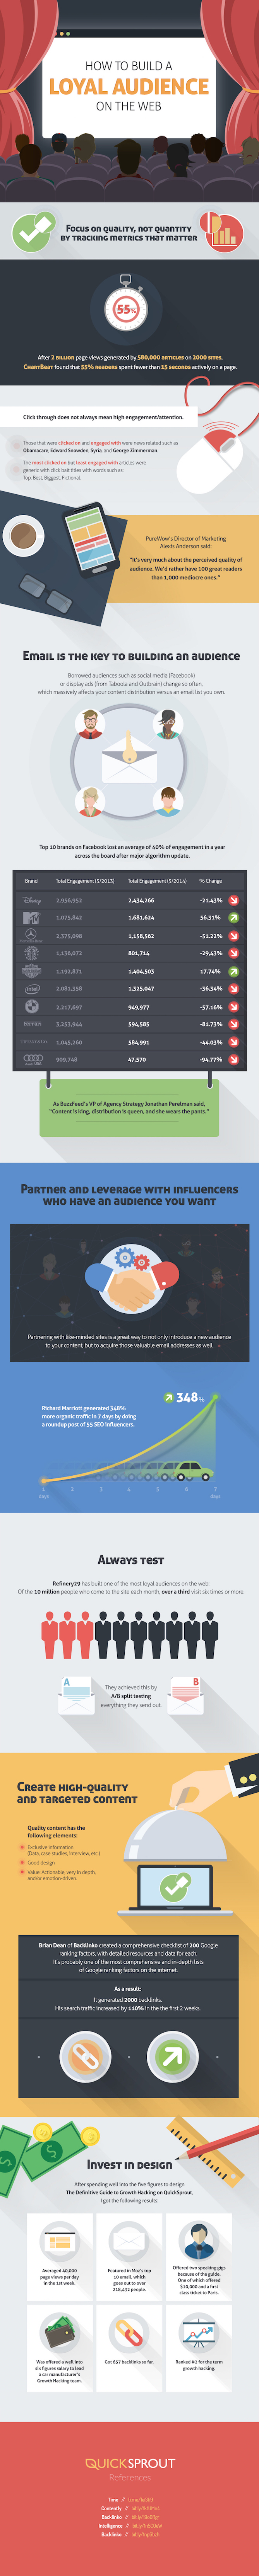 build-loyal-audience-infographic